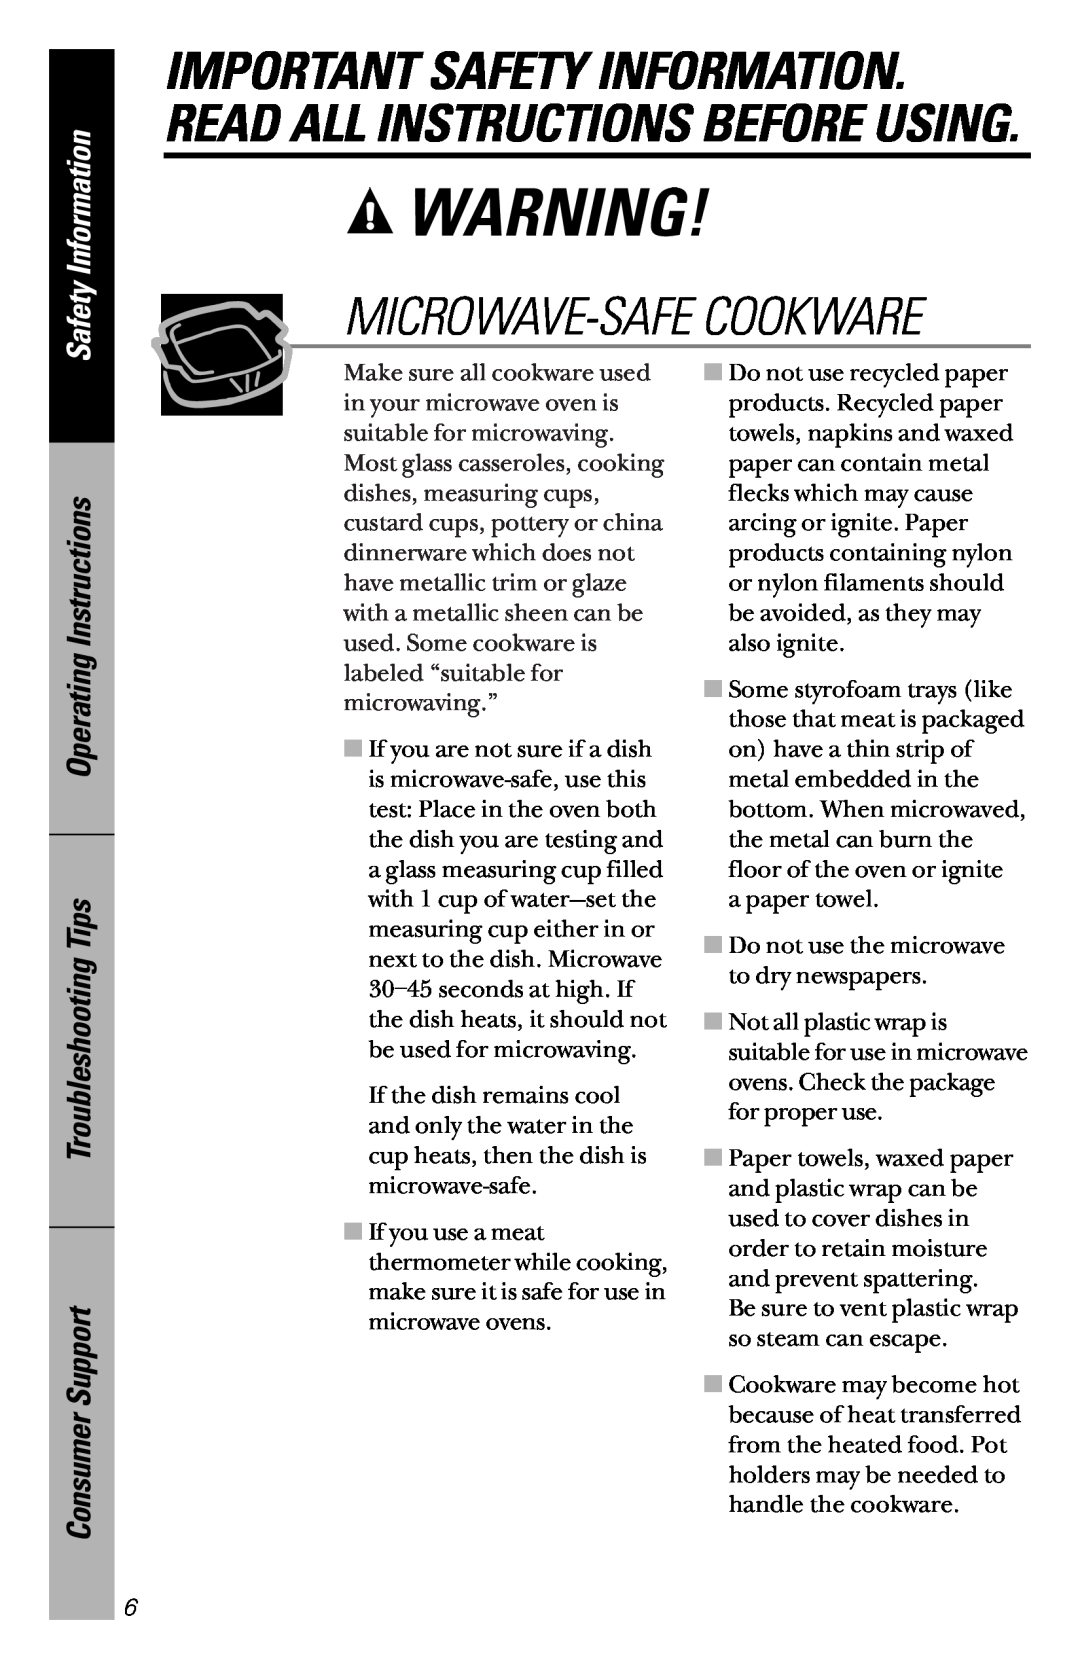 GE JVM1841 Microwave-Safe Cookware, Operating Instructions Troubleshooting Tips Consumer Support, Safety Information 